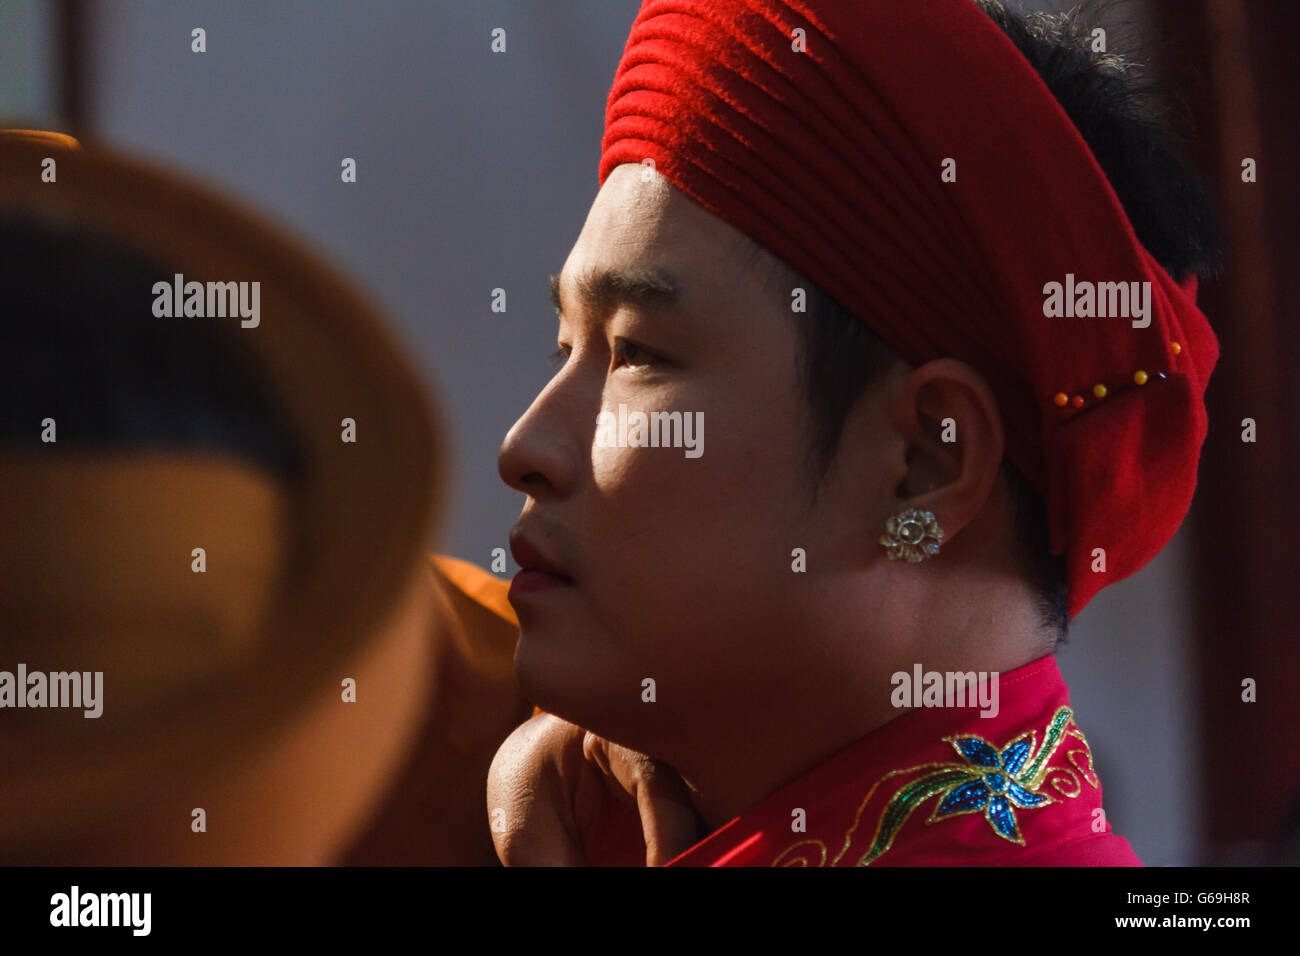 A male medium is dressed up and about to perform Len Dong, a spirit mediumship ritual in Central Vietnam. Stock Photo